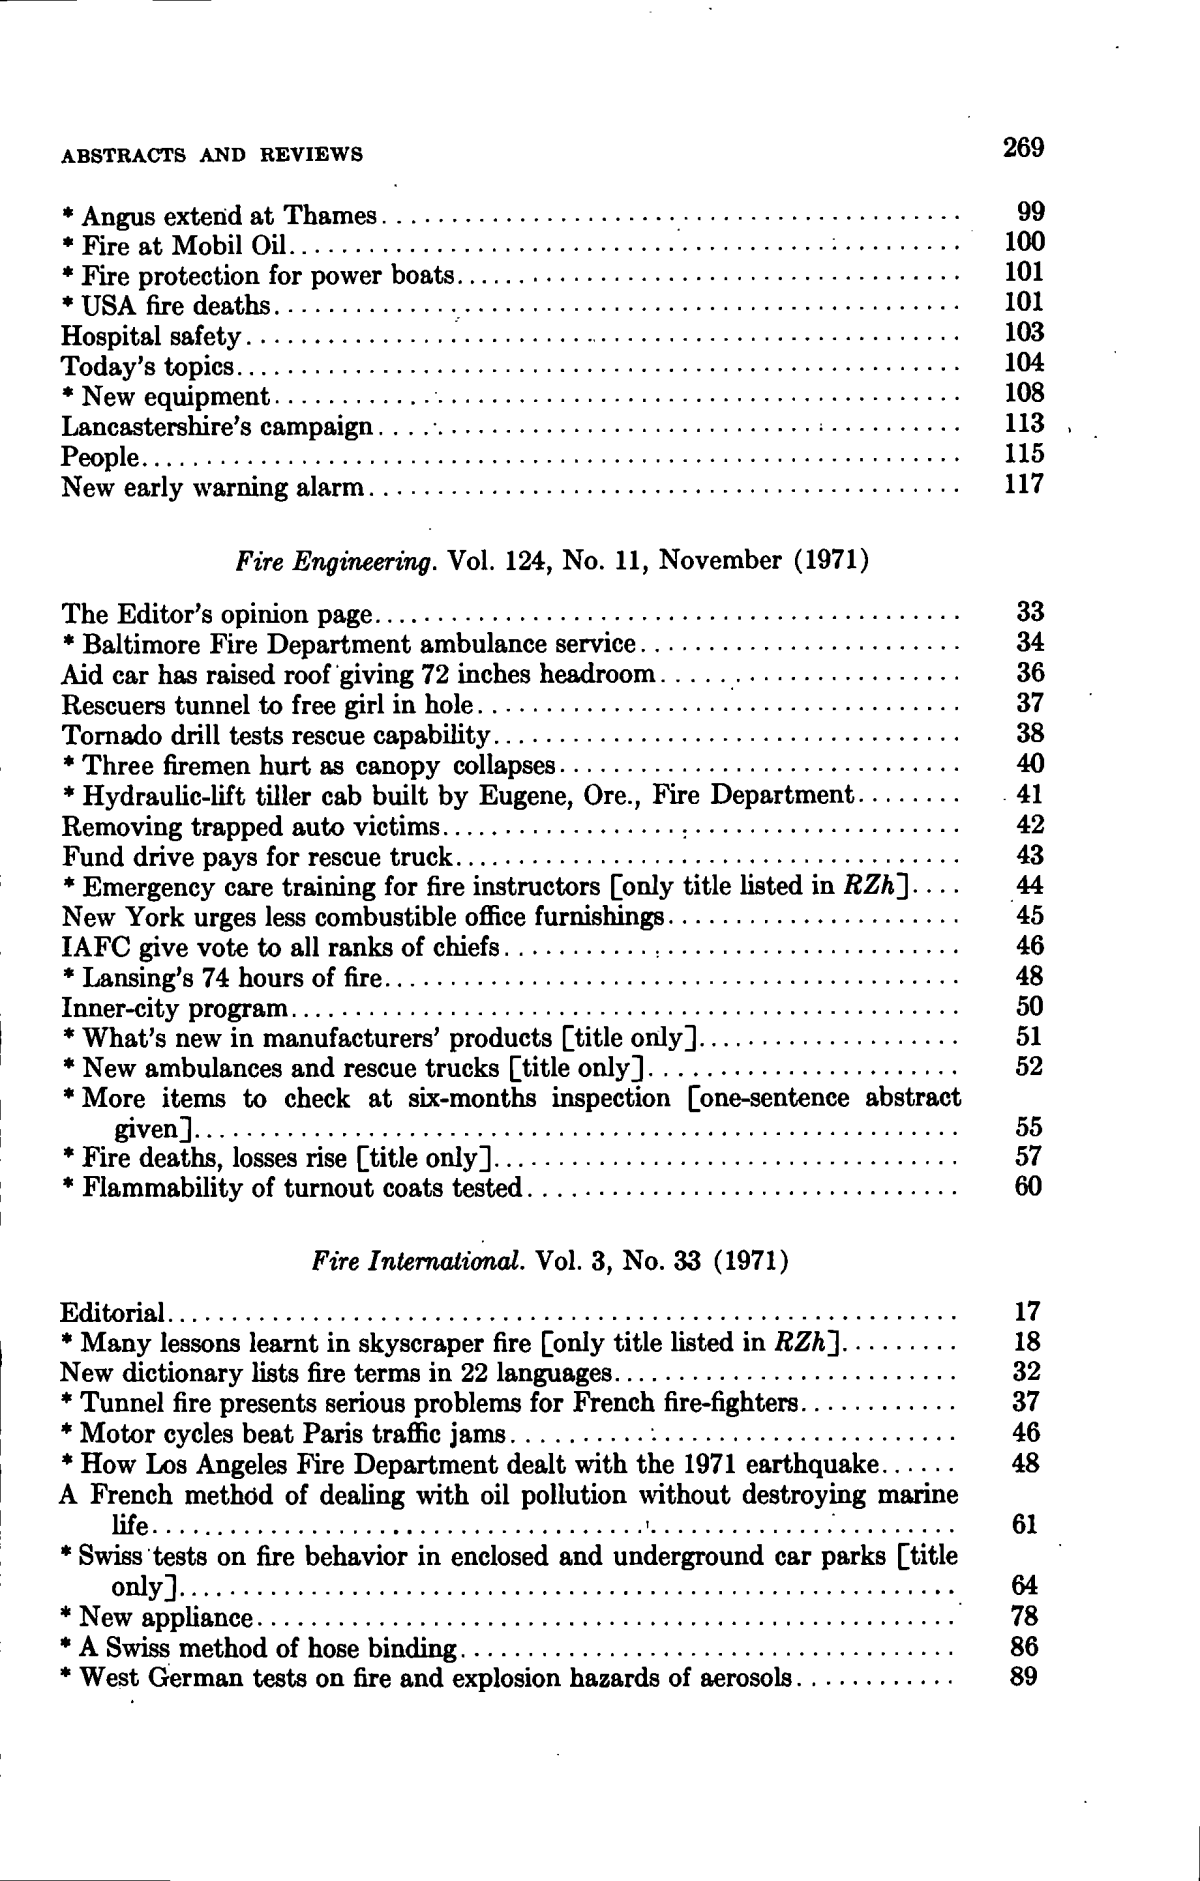 Soviet Abstract Journal Fire Protection | Fire research abstracts